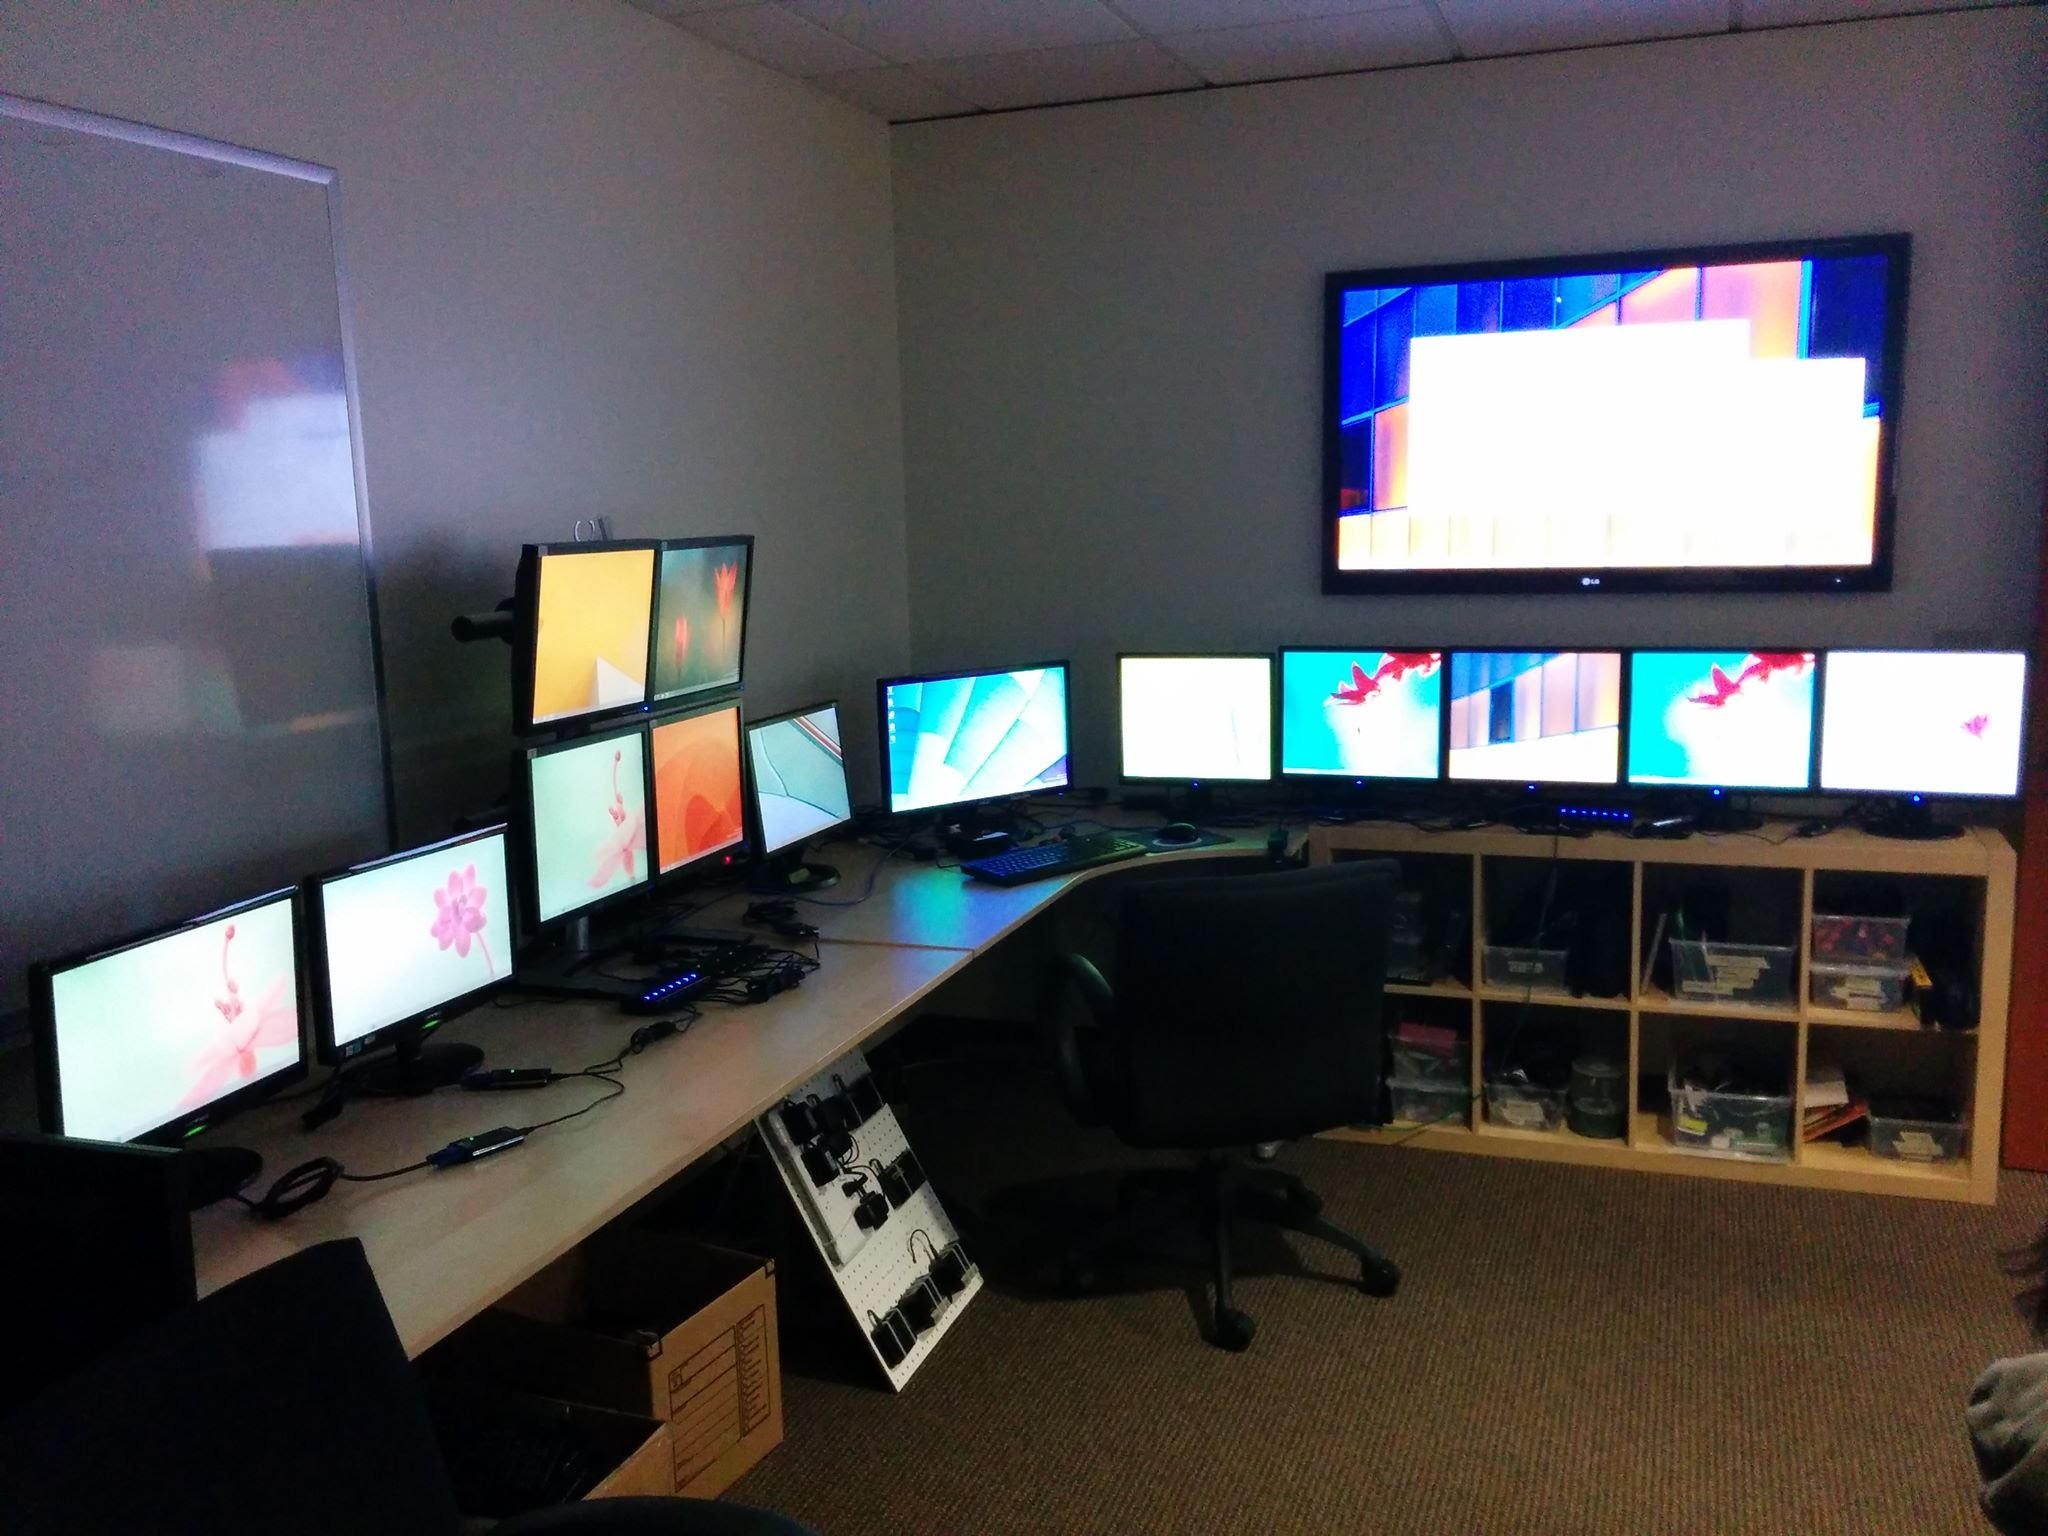 2048x1536 14 Monitors on a Single Windows 8 PC with USB Graphics Adapters - YouTube